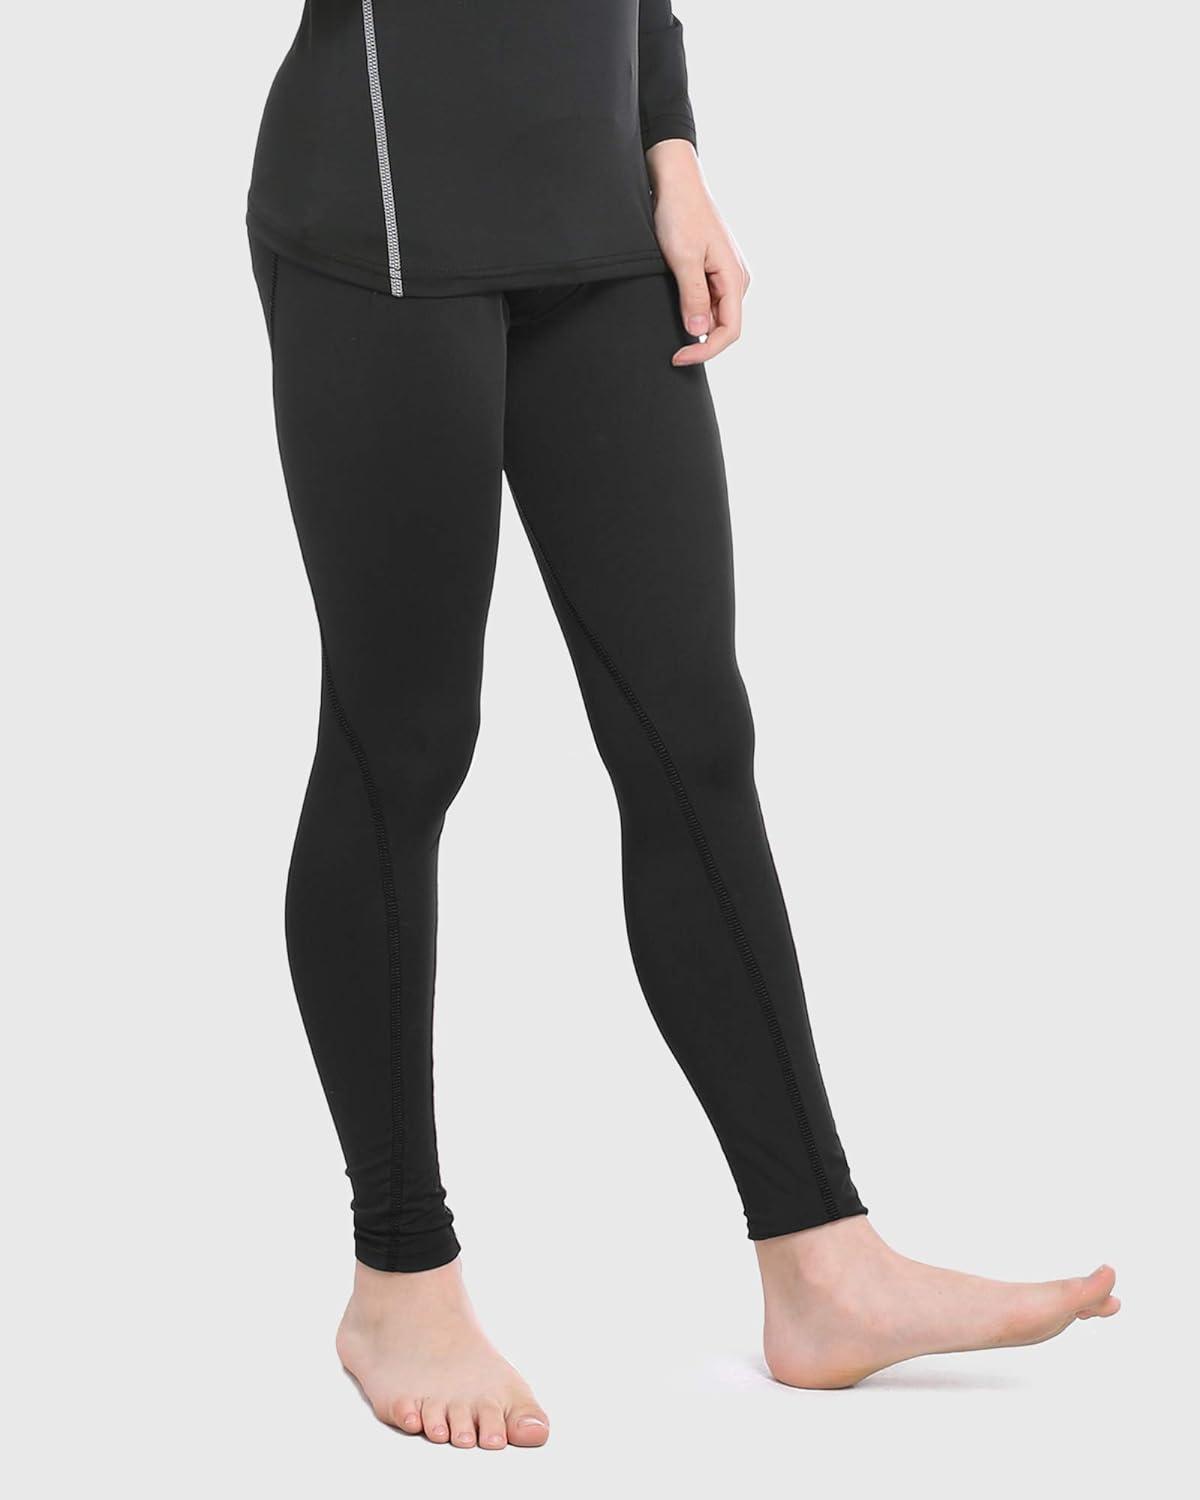 3 Pack Black Thermal Tights for Women | Opaque Fleece Lined Winter Tights